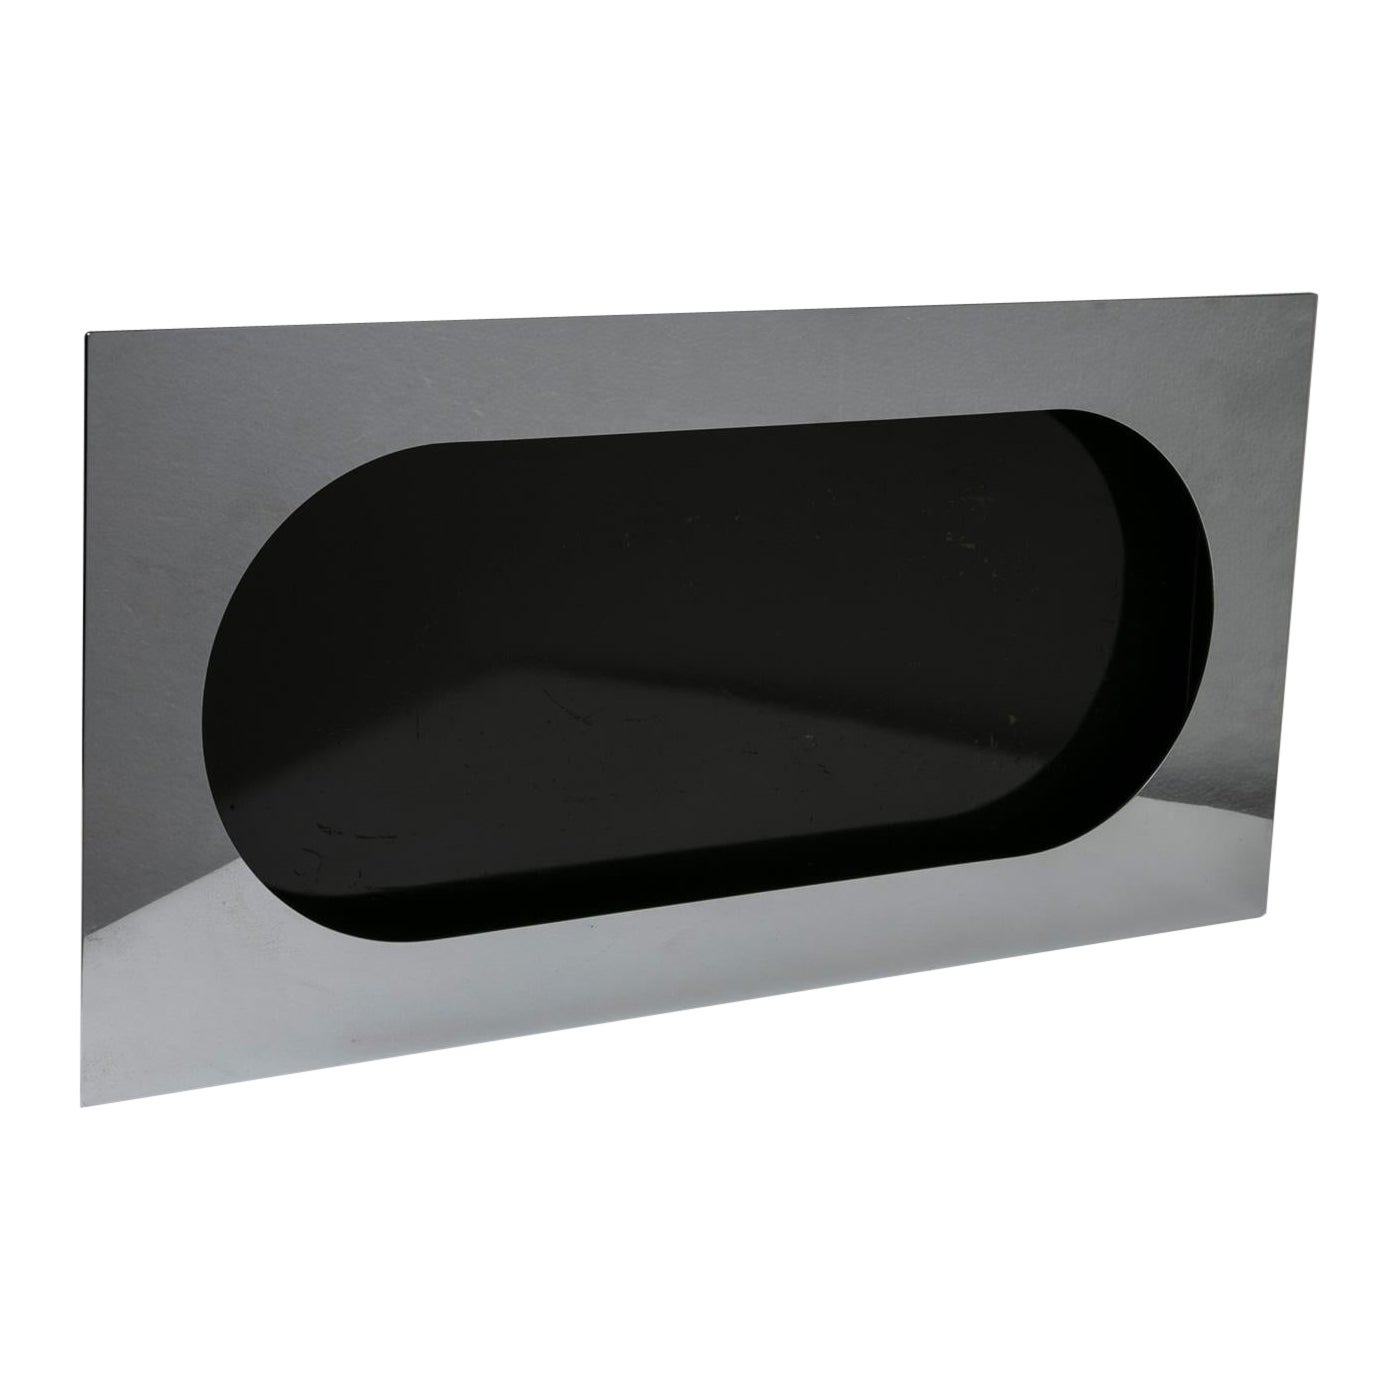 "Biscotto" Large Chrome and Black Tray by Mazza for Quattrifolio, Italy, 1970s For Sale